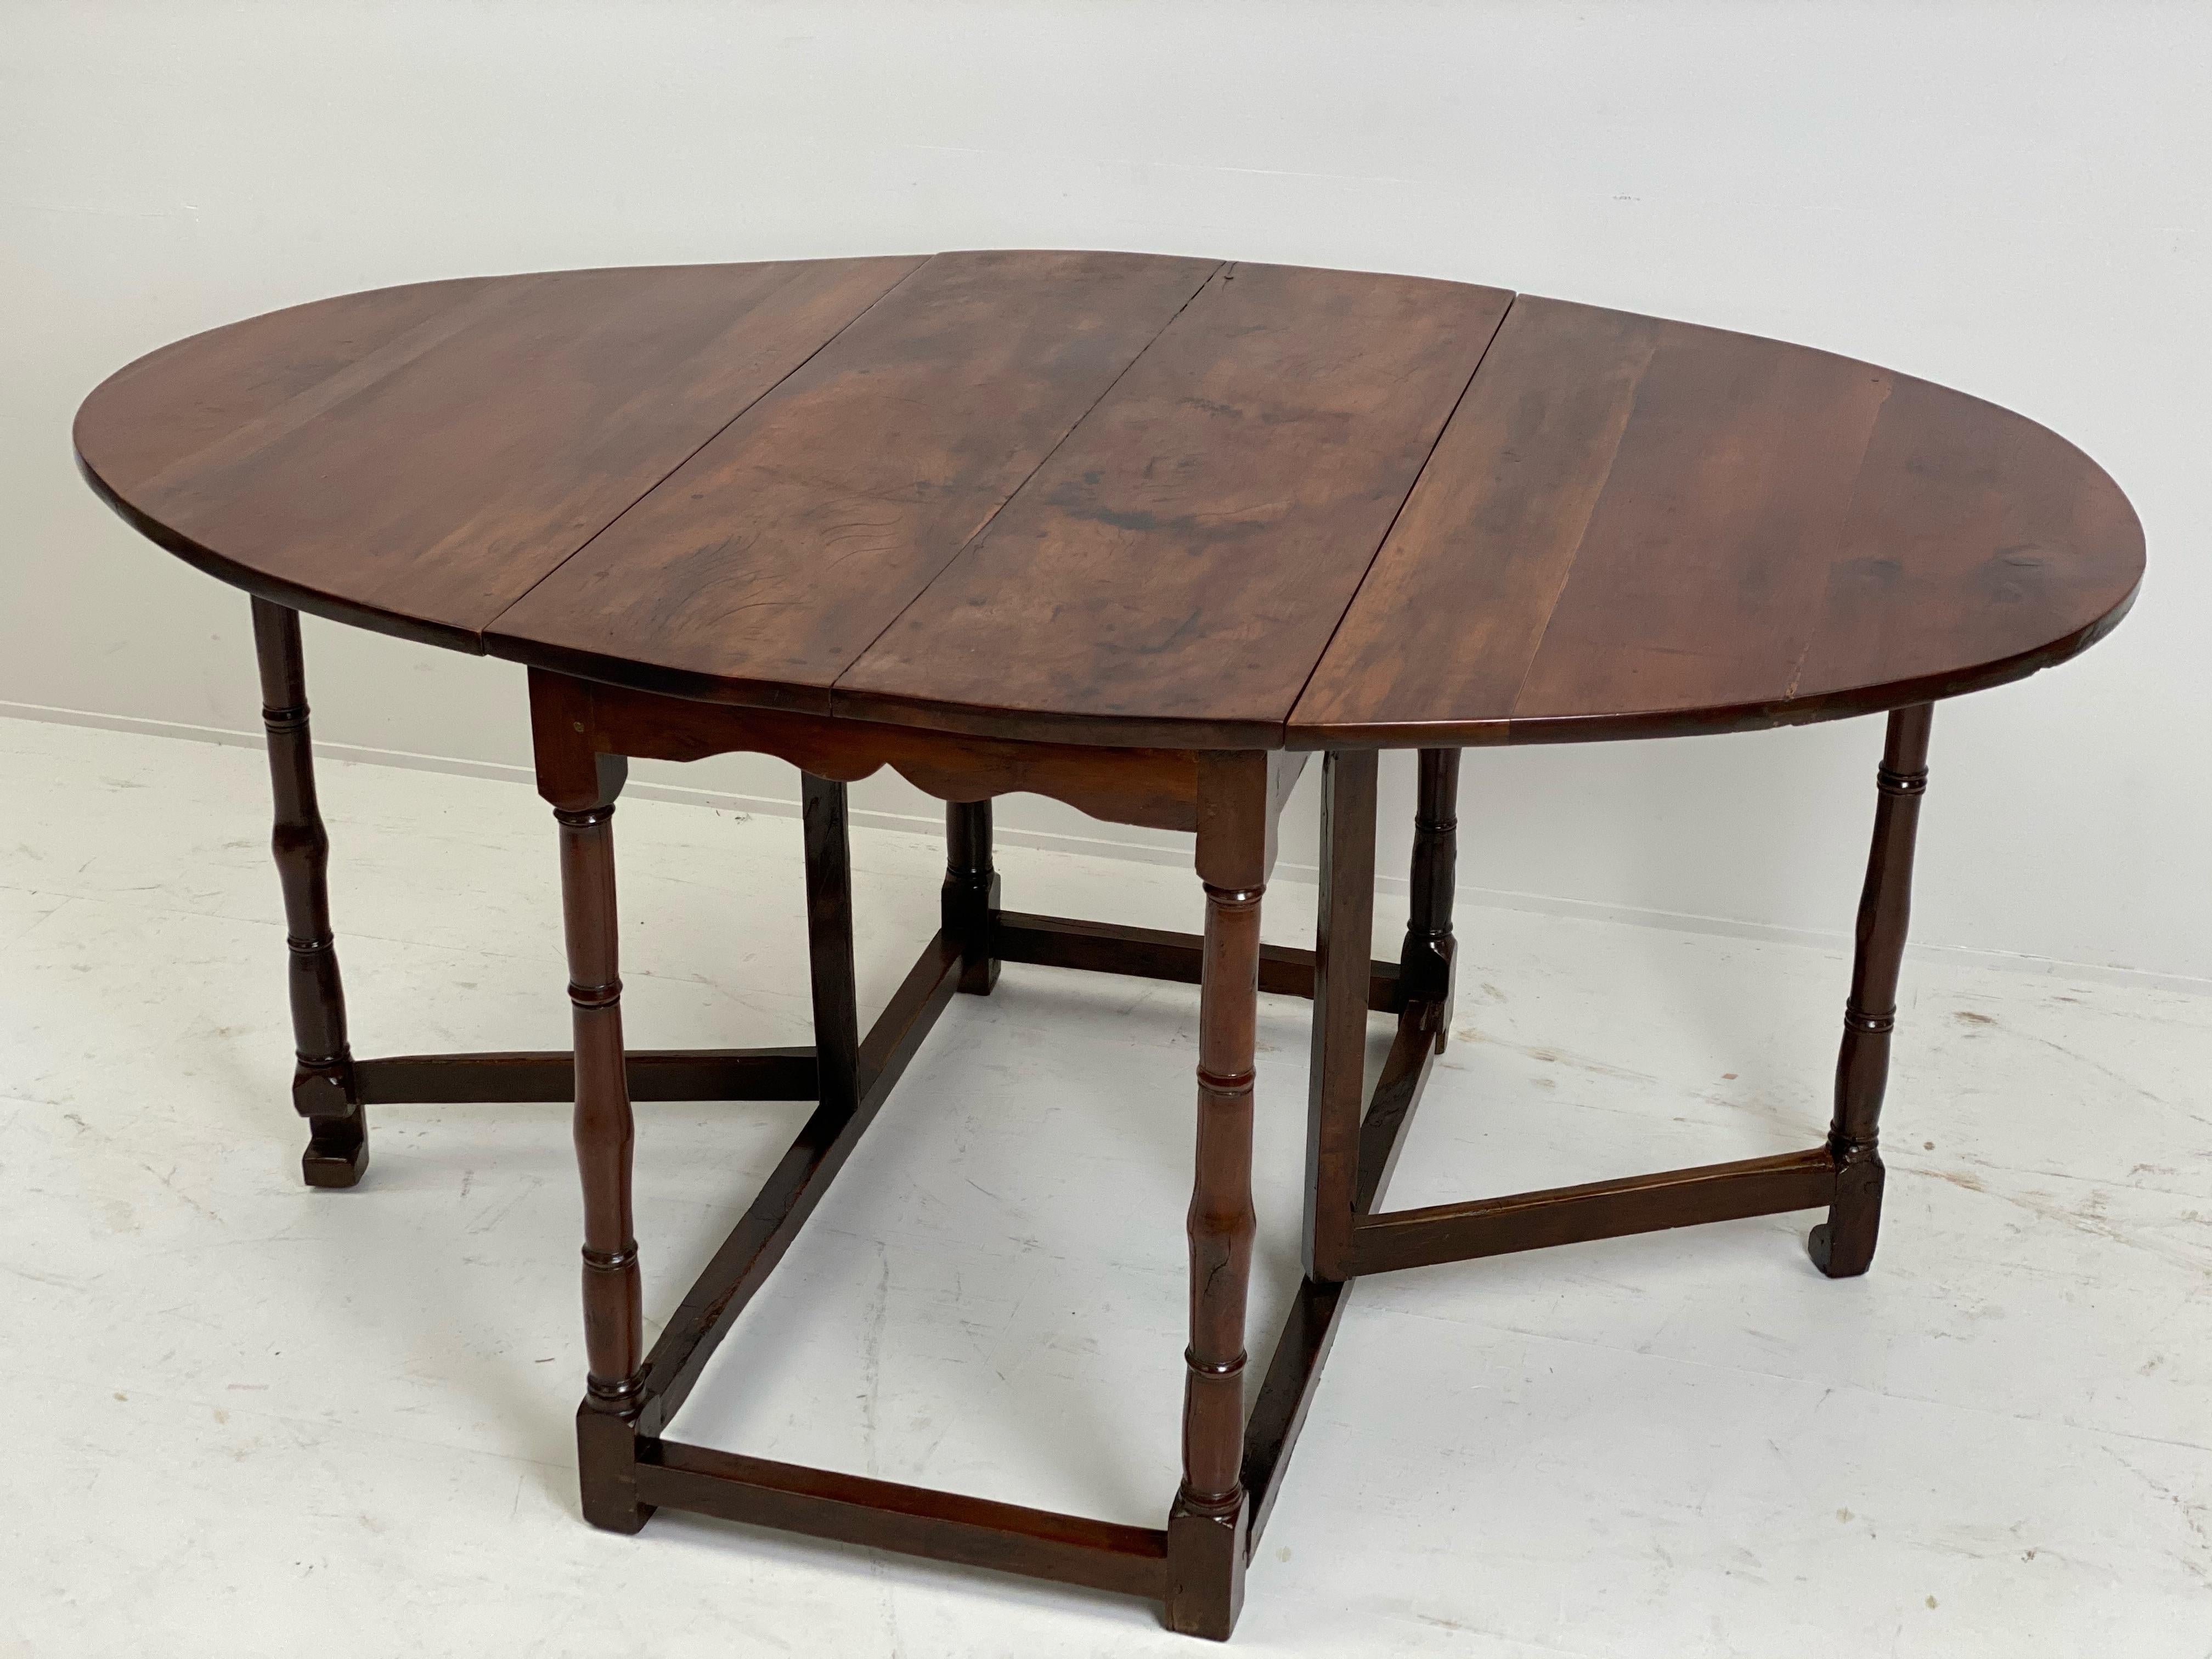 Beautiful Antique Gatelag table with exceptional patina,
England,18 th Century
in Yew, very elegant feet,
warm and worn Brown tinted color, great shine of the wood,
a table full of charm and authenticity